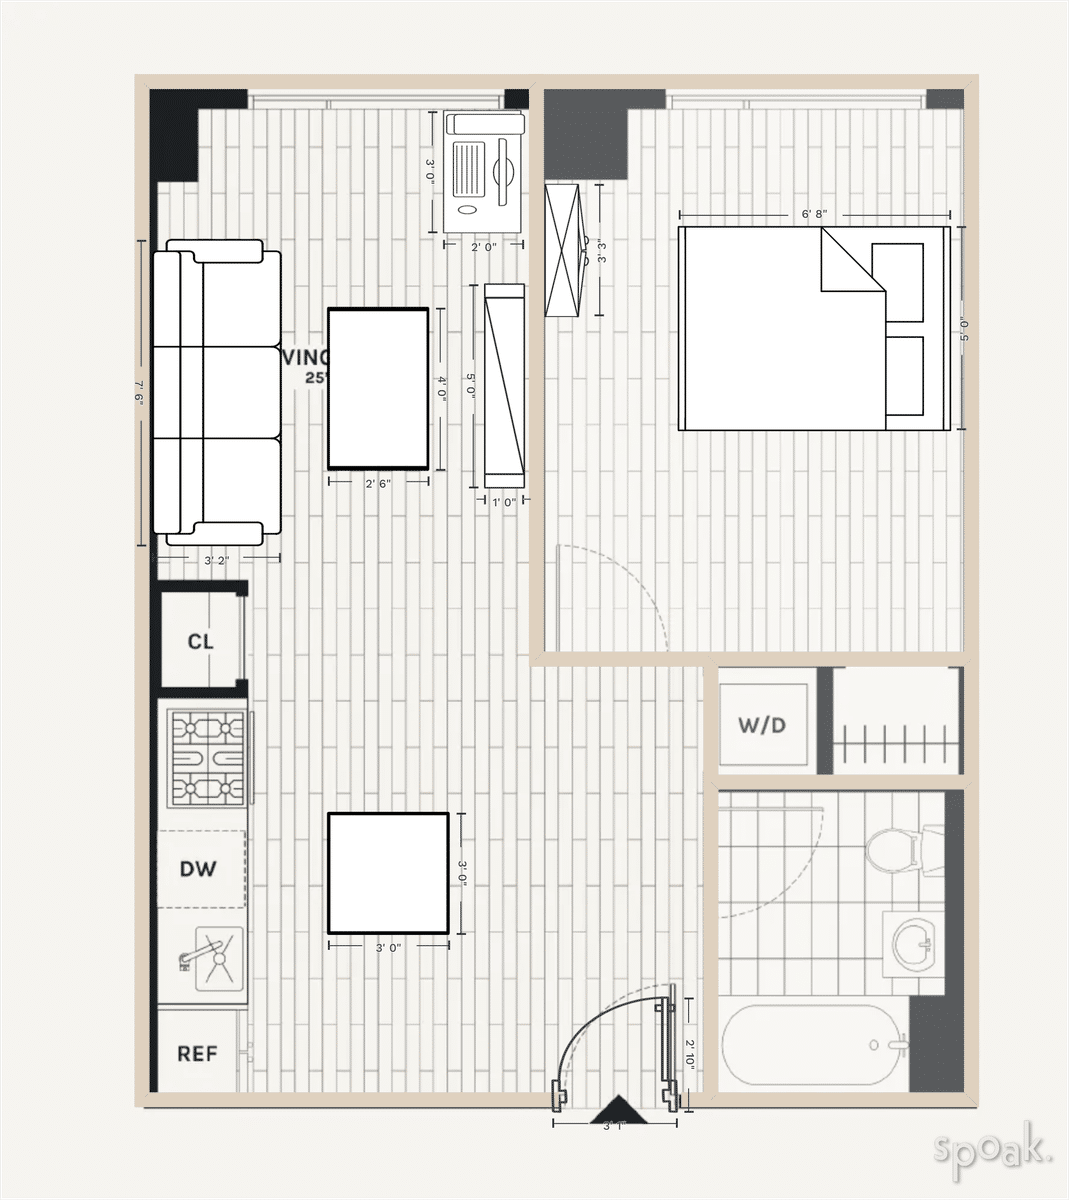 Multi Story Apartment Floor Plan designed by Anvesh Jagini